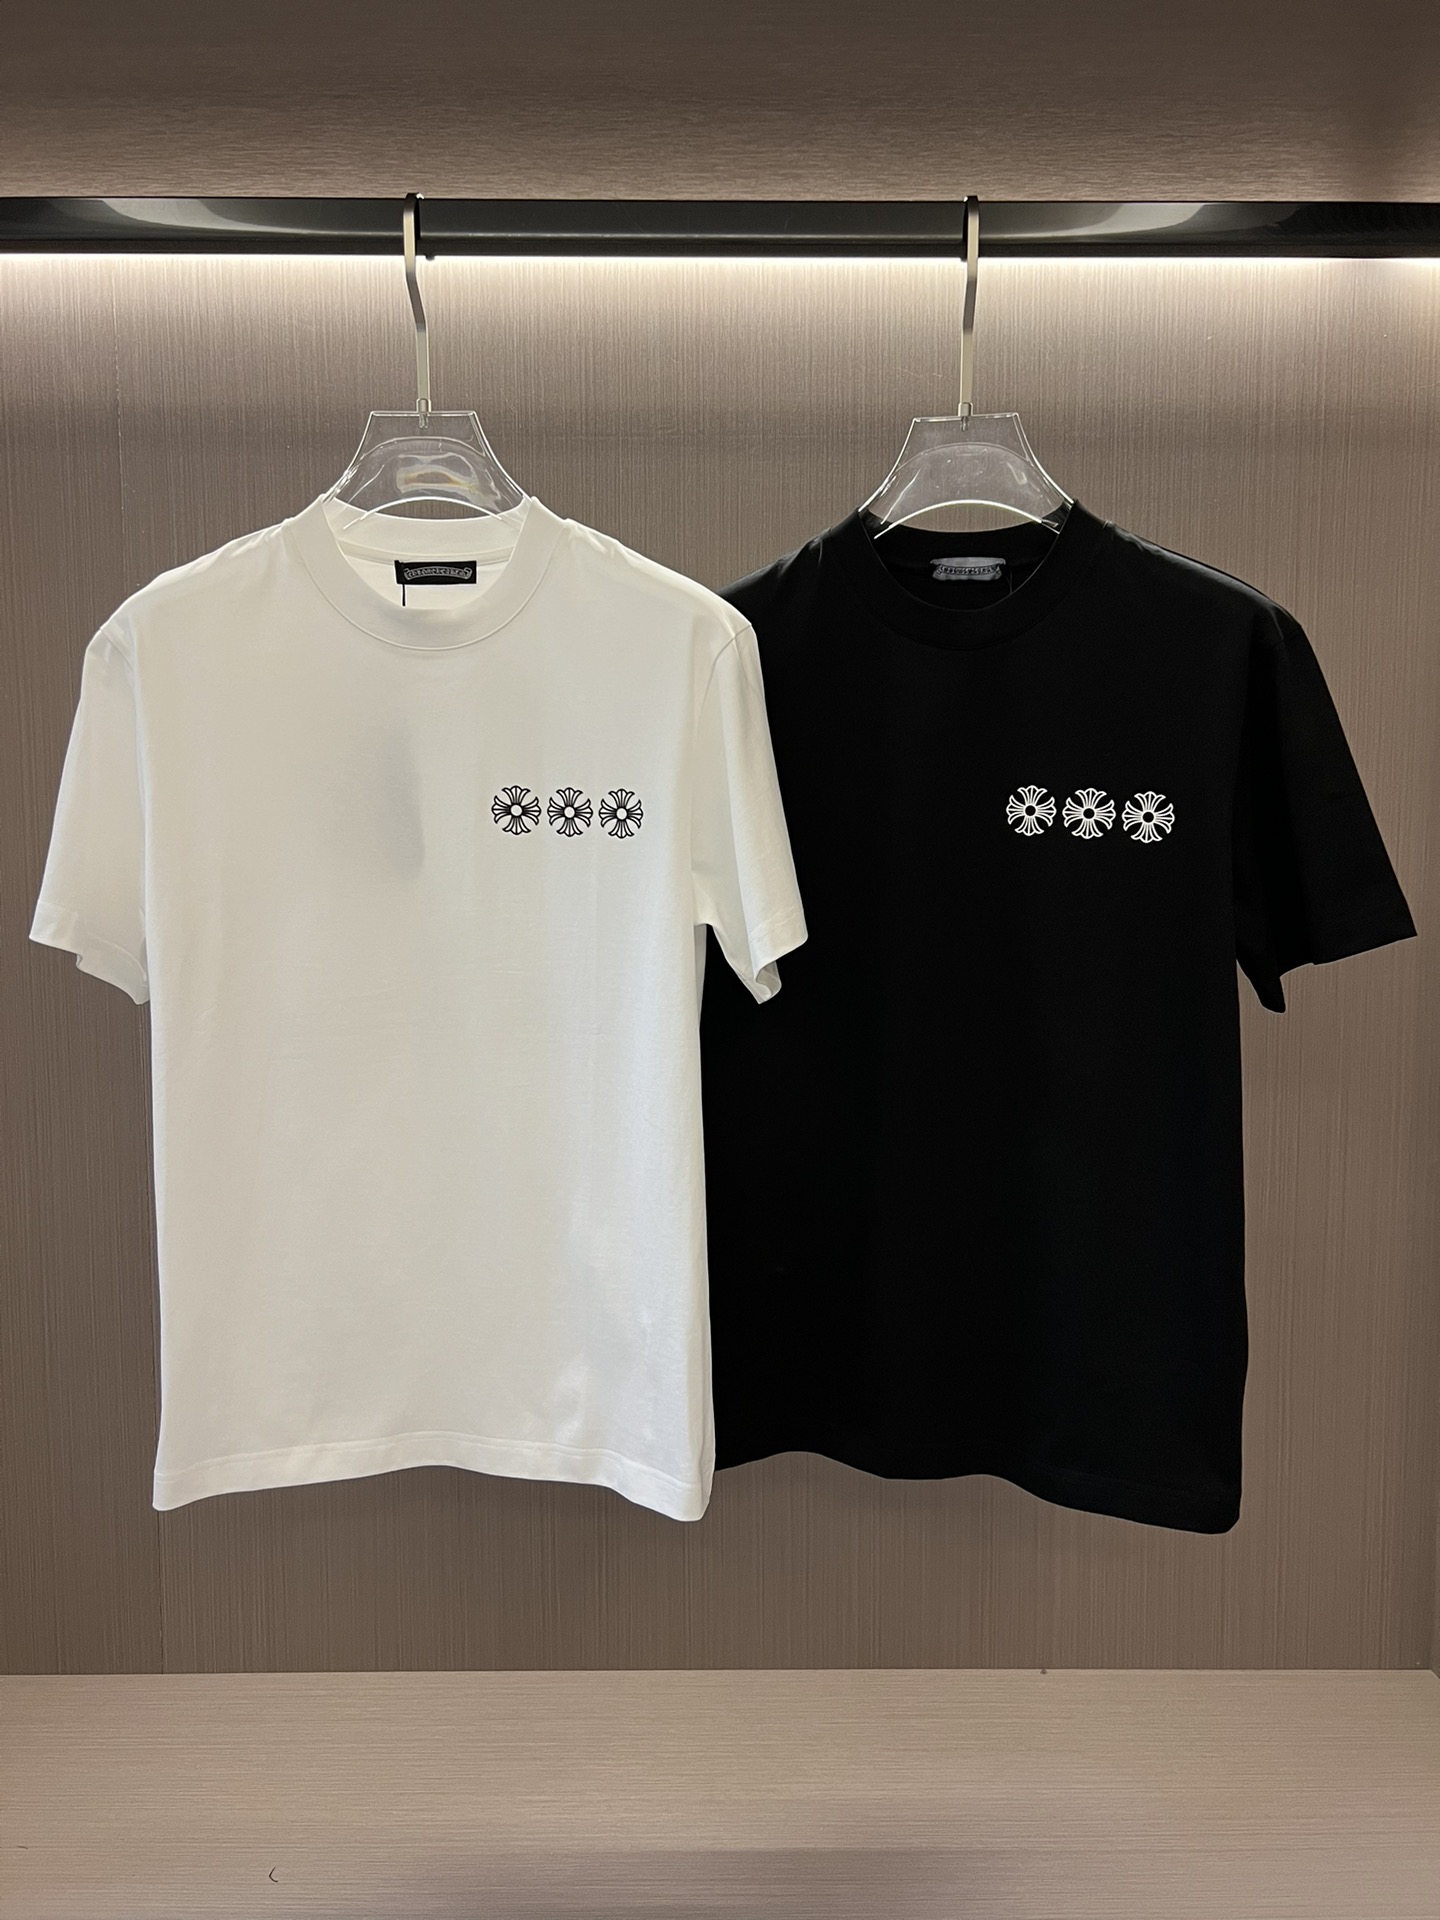 Chrome Hearts Clothing T-Shirt Black White Cotton Knitted Knitting Summer Collection Fashion Short Sleeve